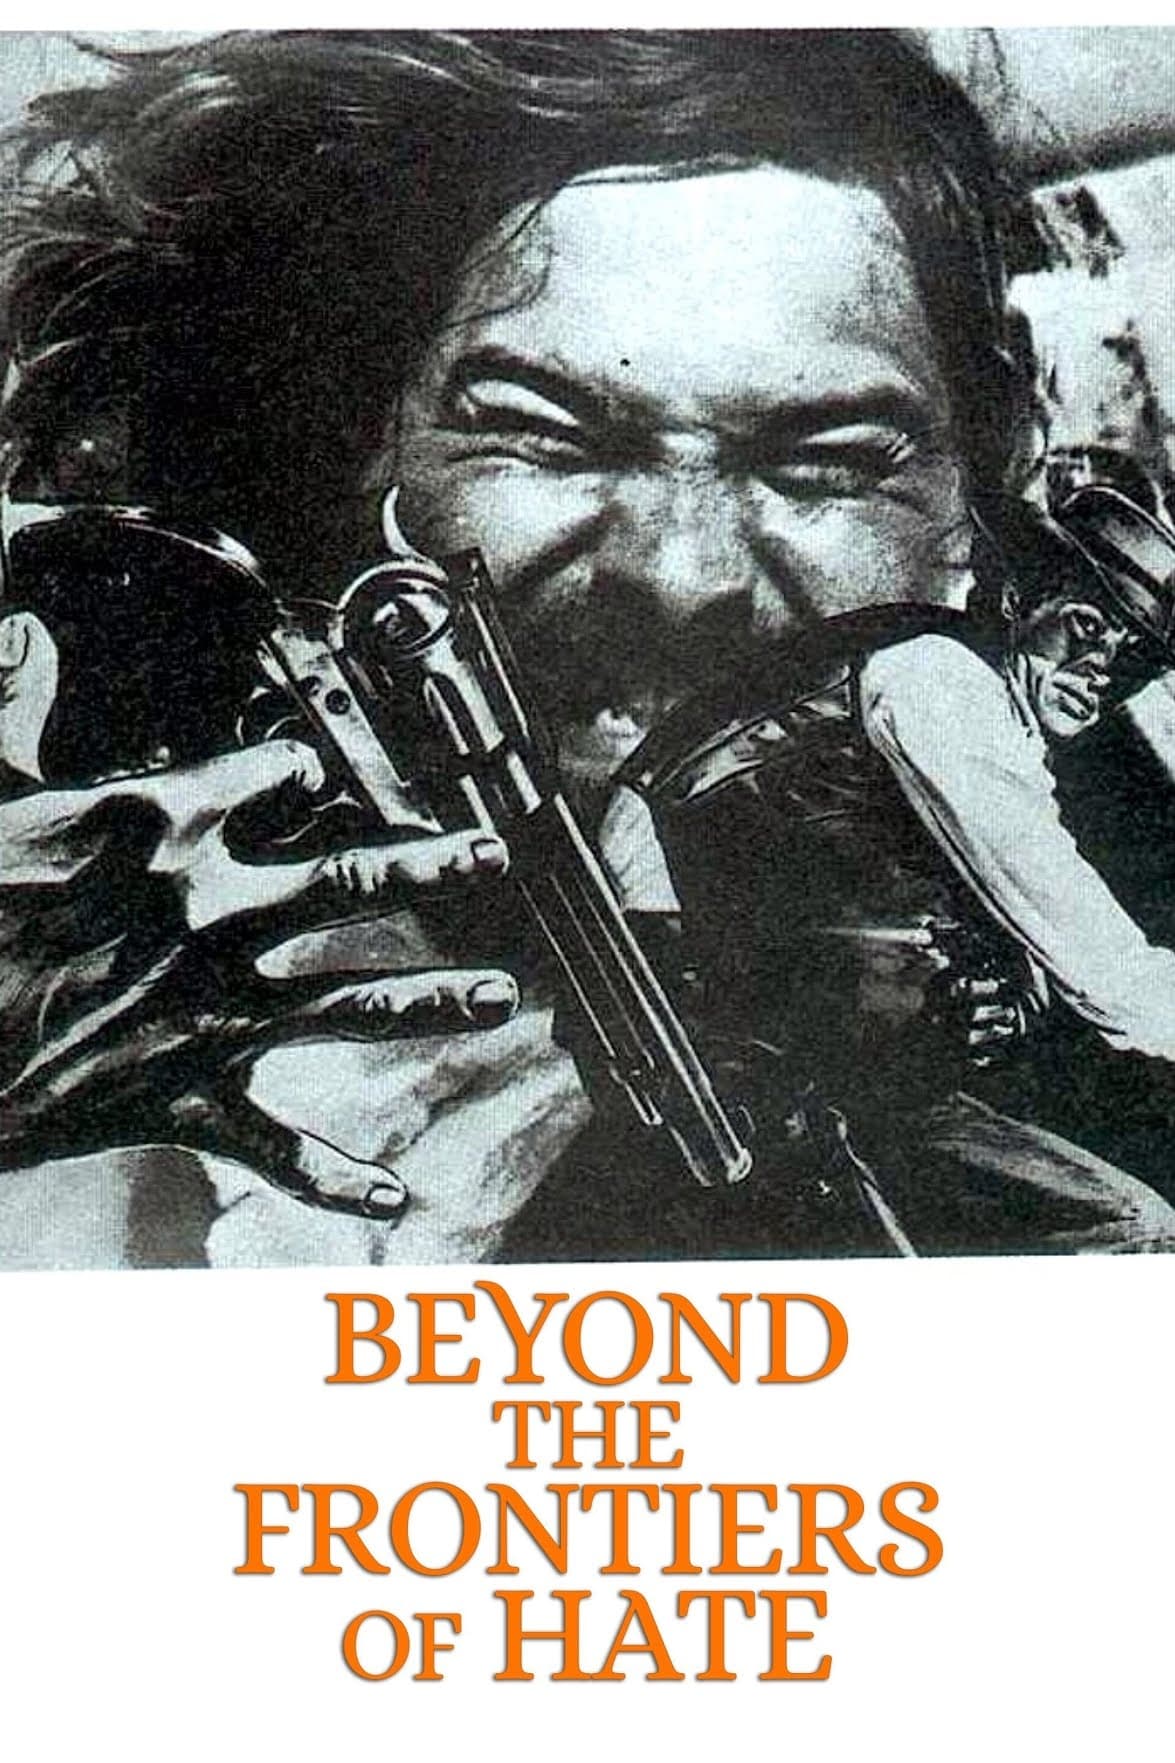 Beyond the Frontiers of Hate (1972)